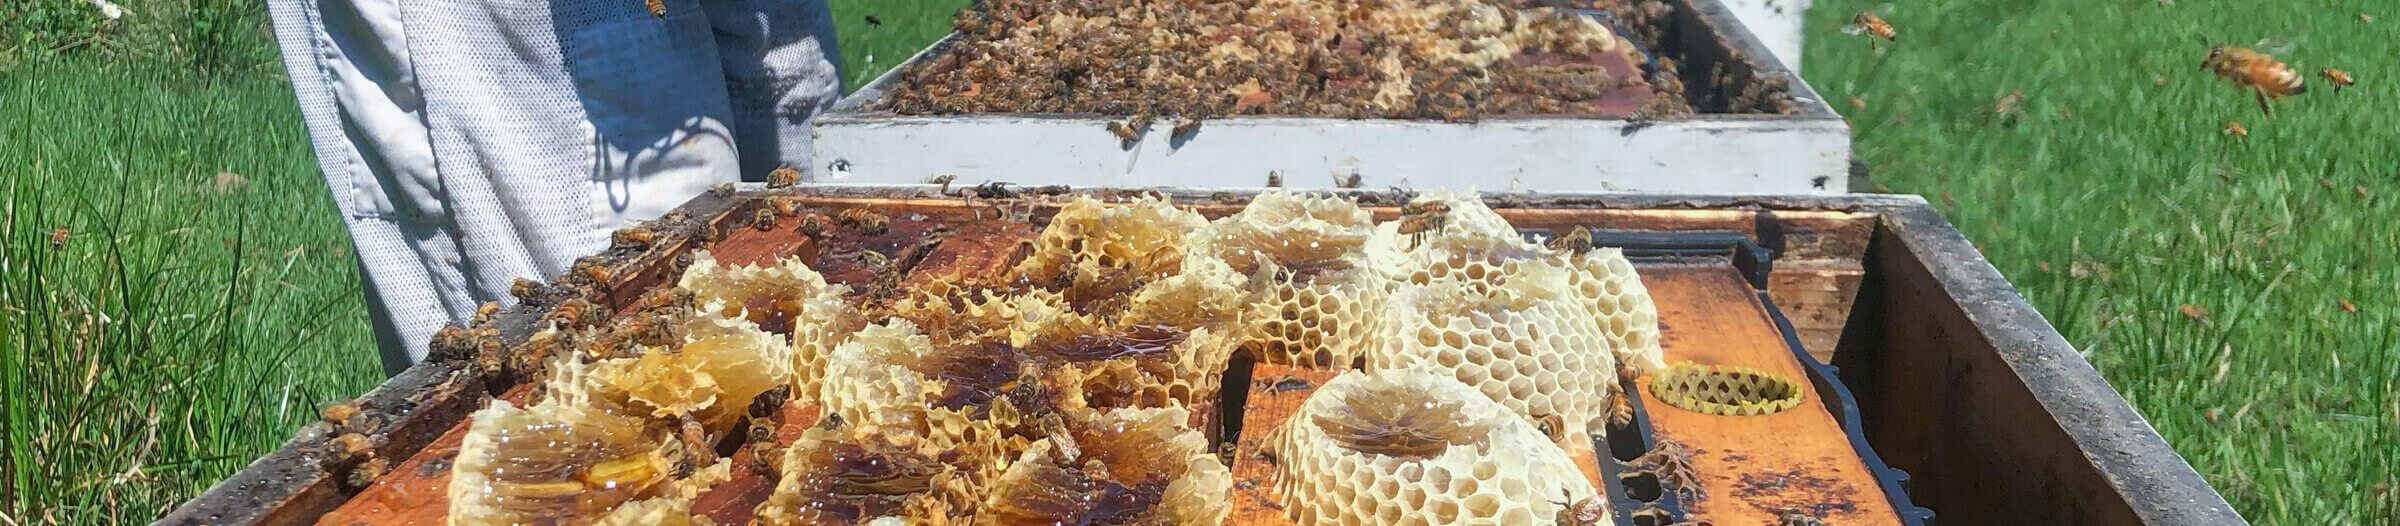 Bees and Honeycombs in Open Hive